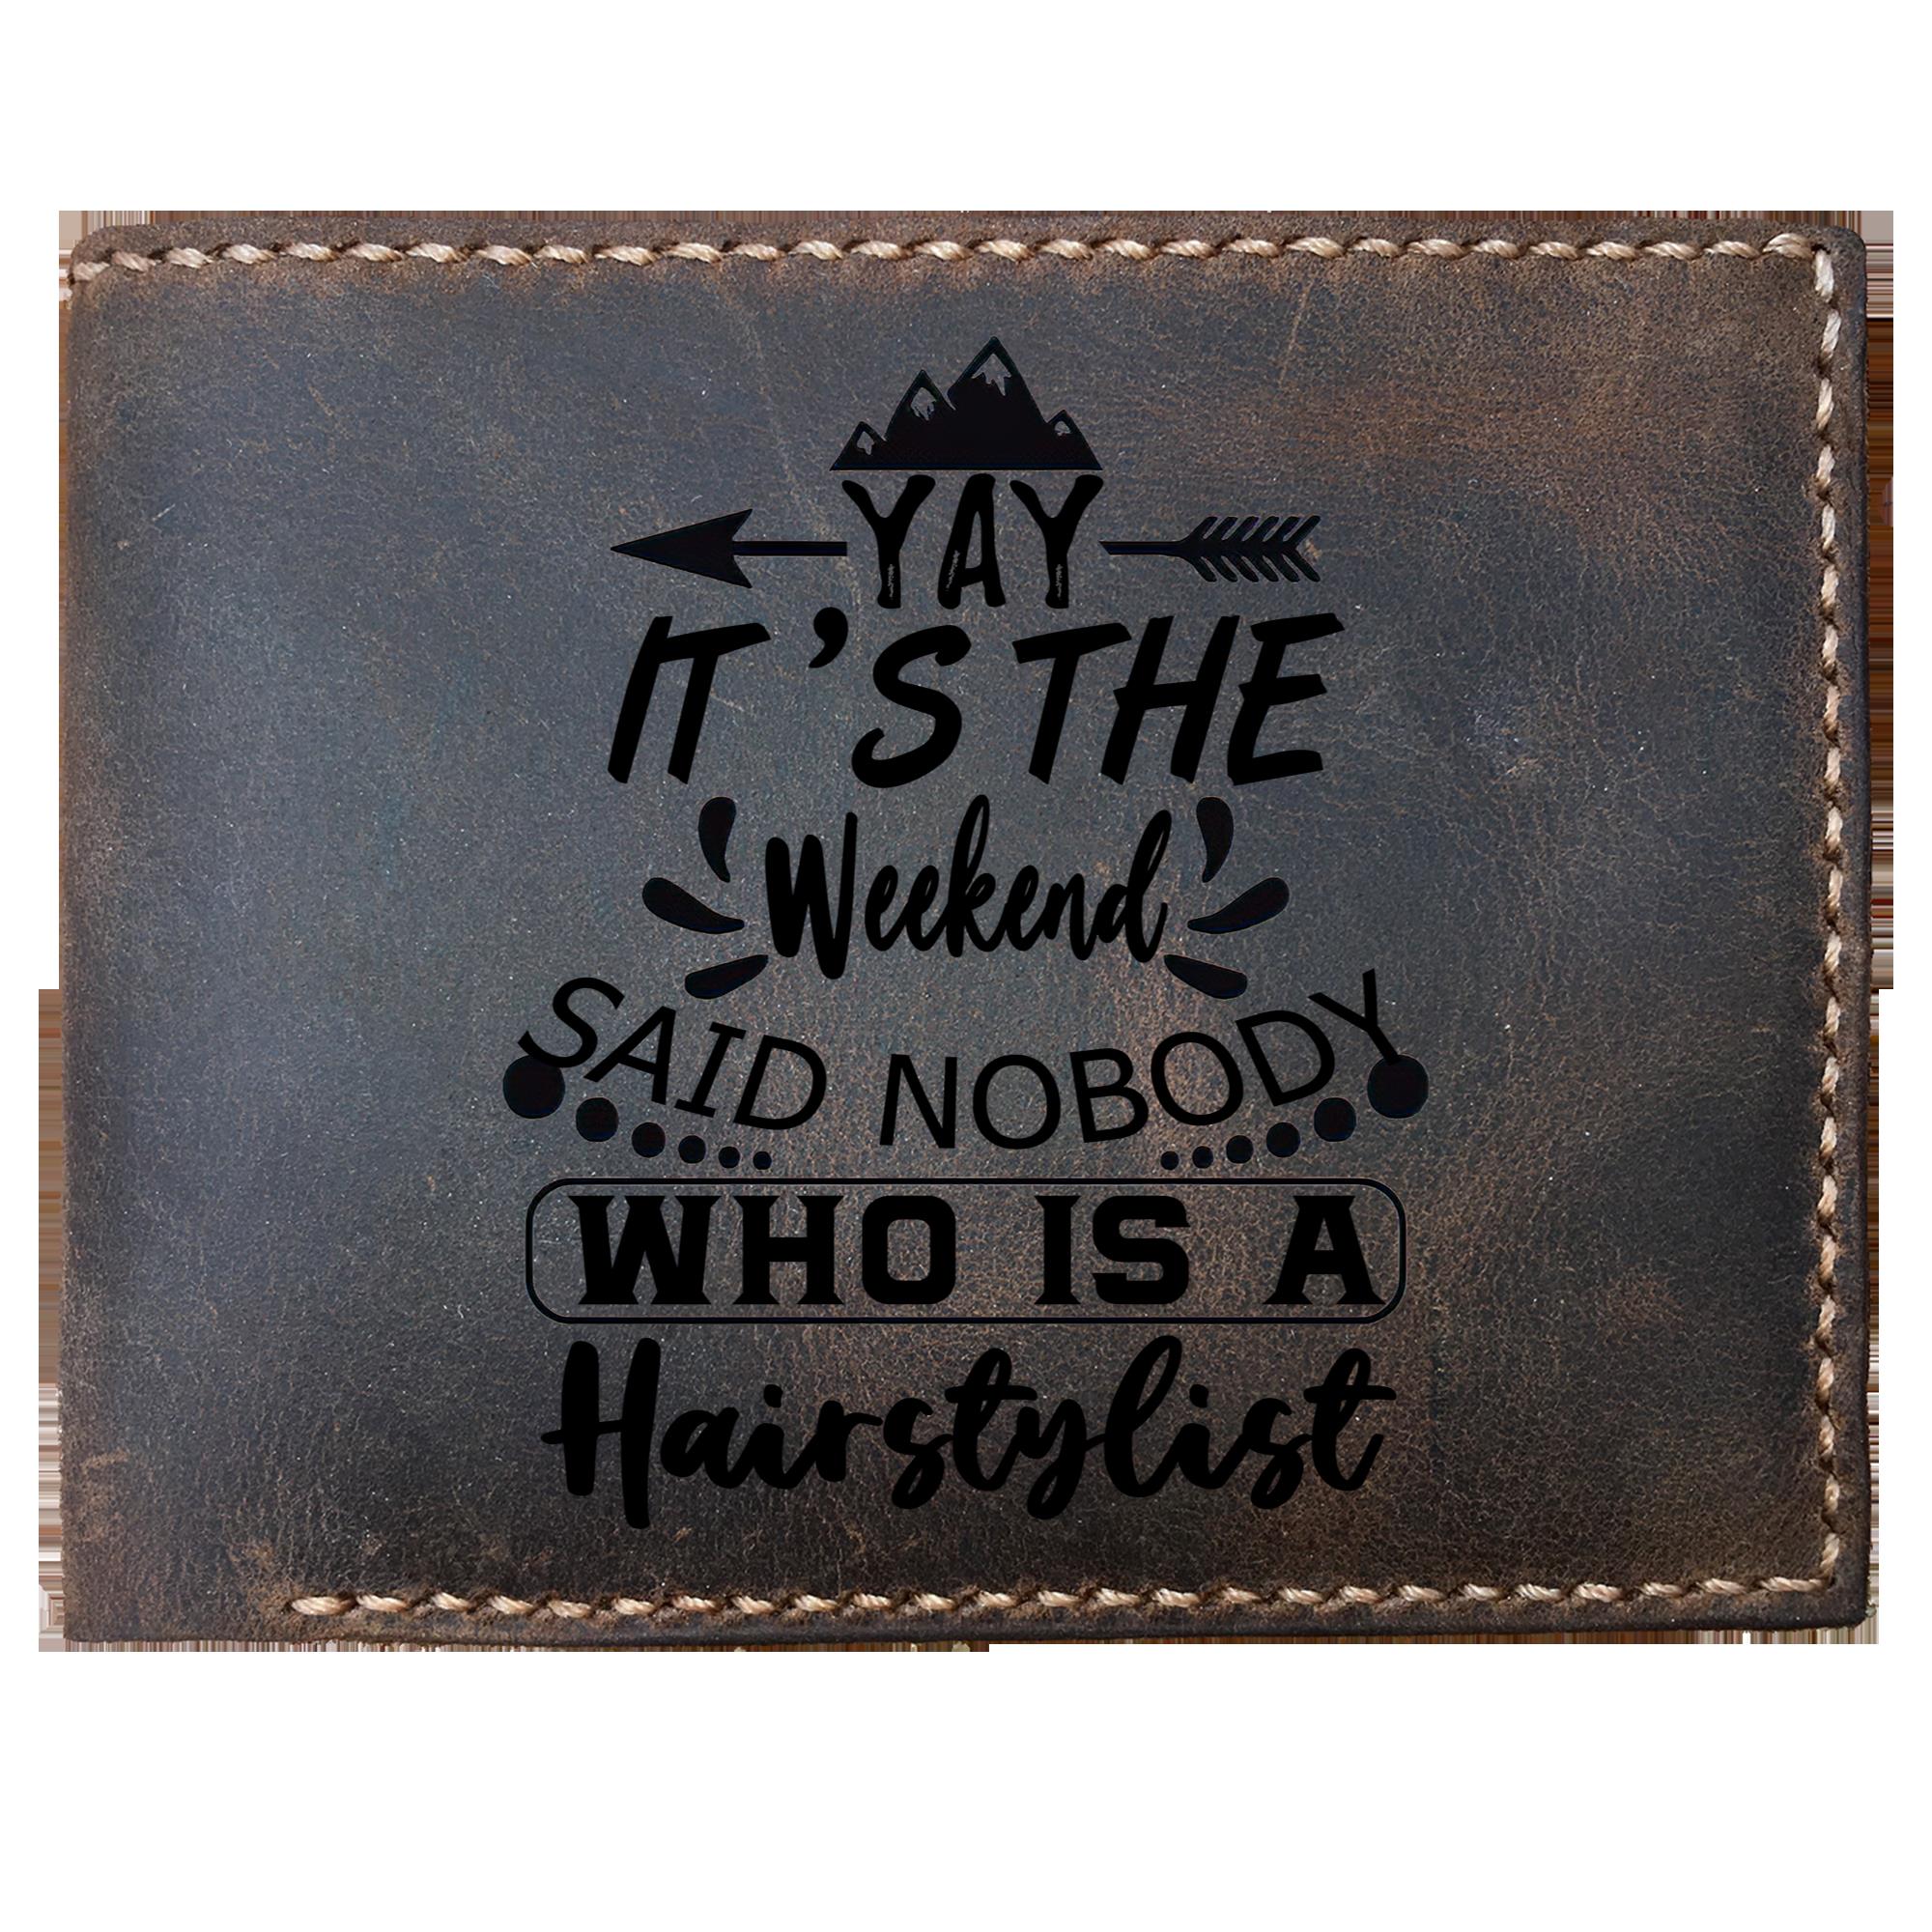 Skitongifts Funny Custom Laser Engraved Bifold Leather Wallet For Men, It's The Weekend Said Nobody Who Is A Hairstylist, Father's Day Gifts